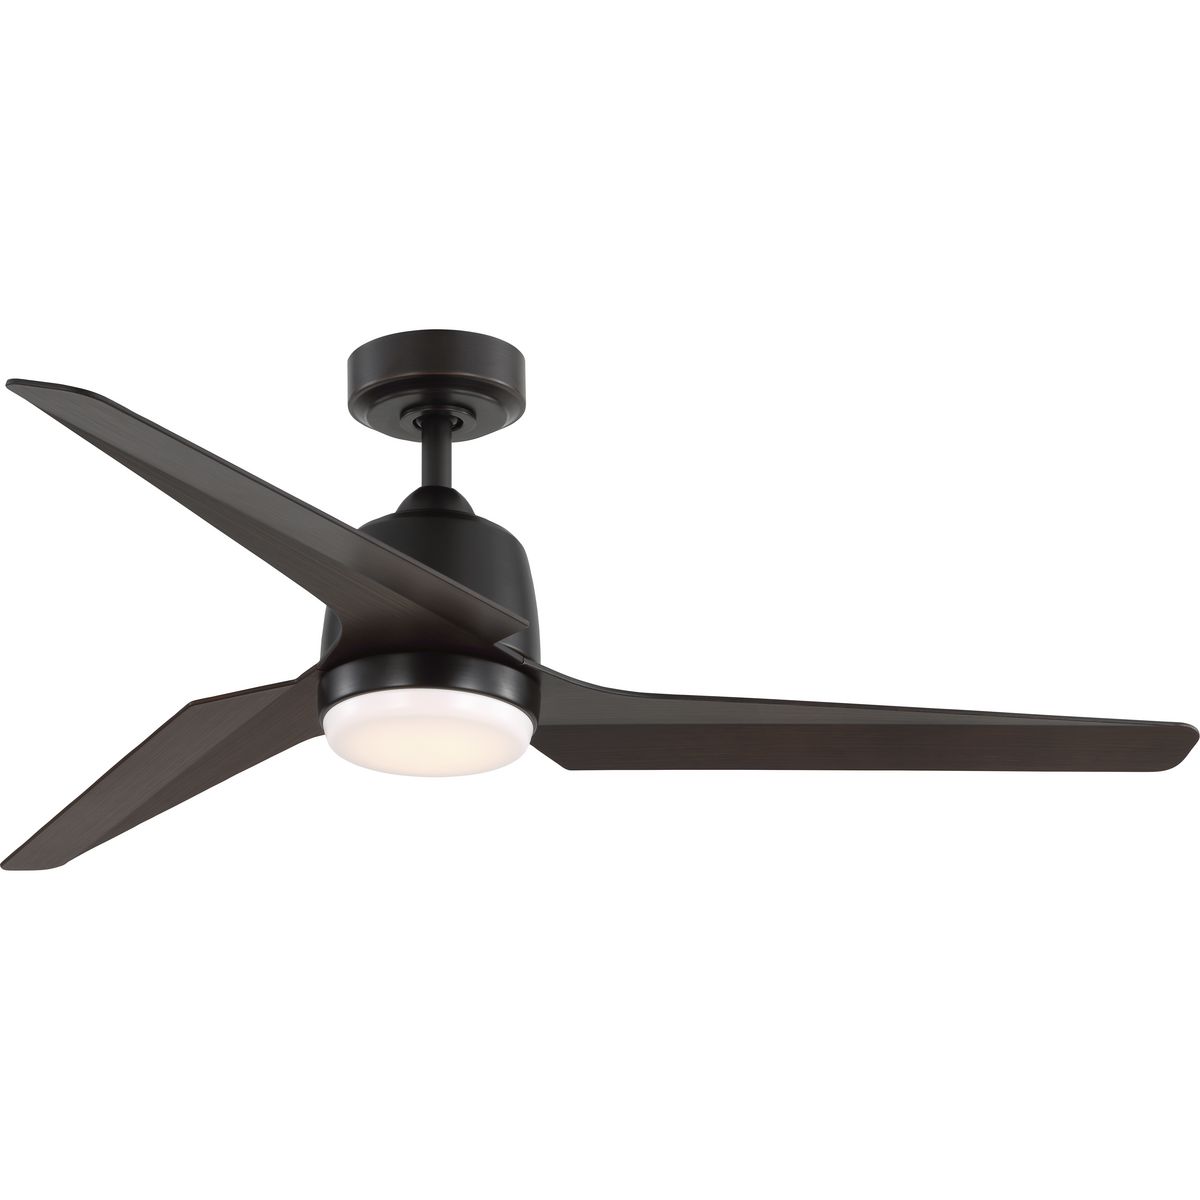 Upshur Collection 52 in. Antique Bronze Transitional Ceiling Fan with LED Light Kit - Damp Location Listed